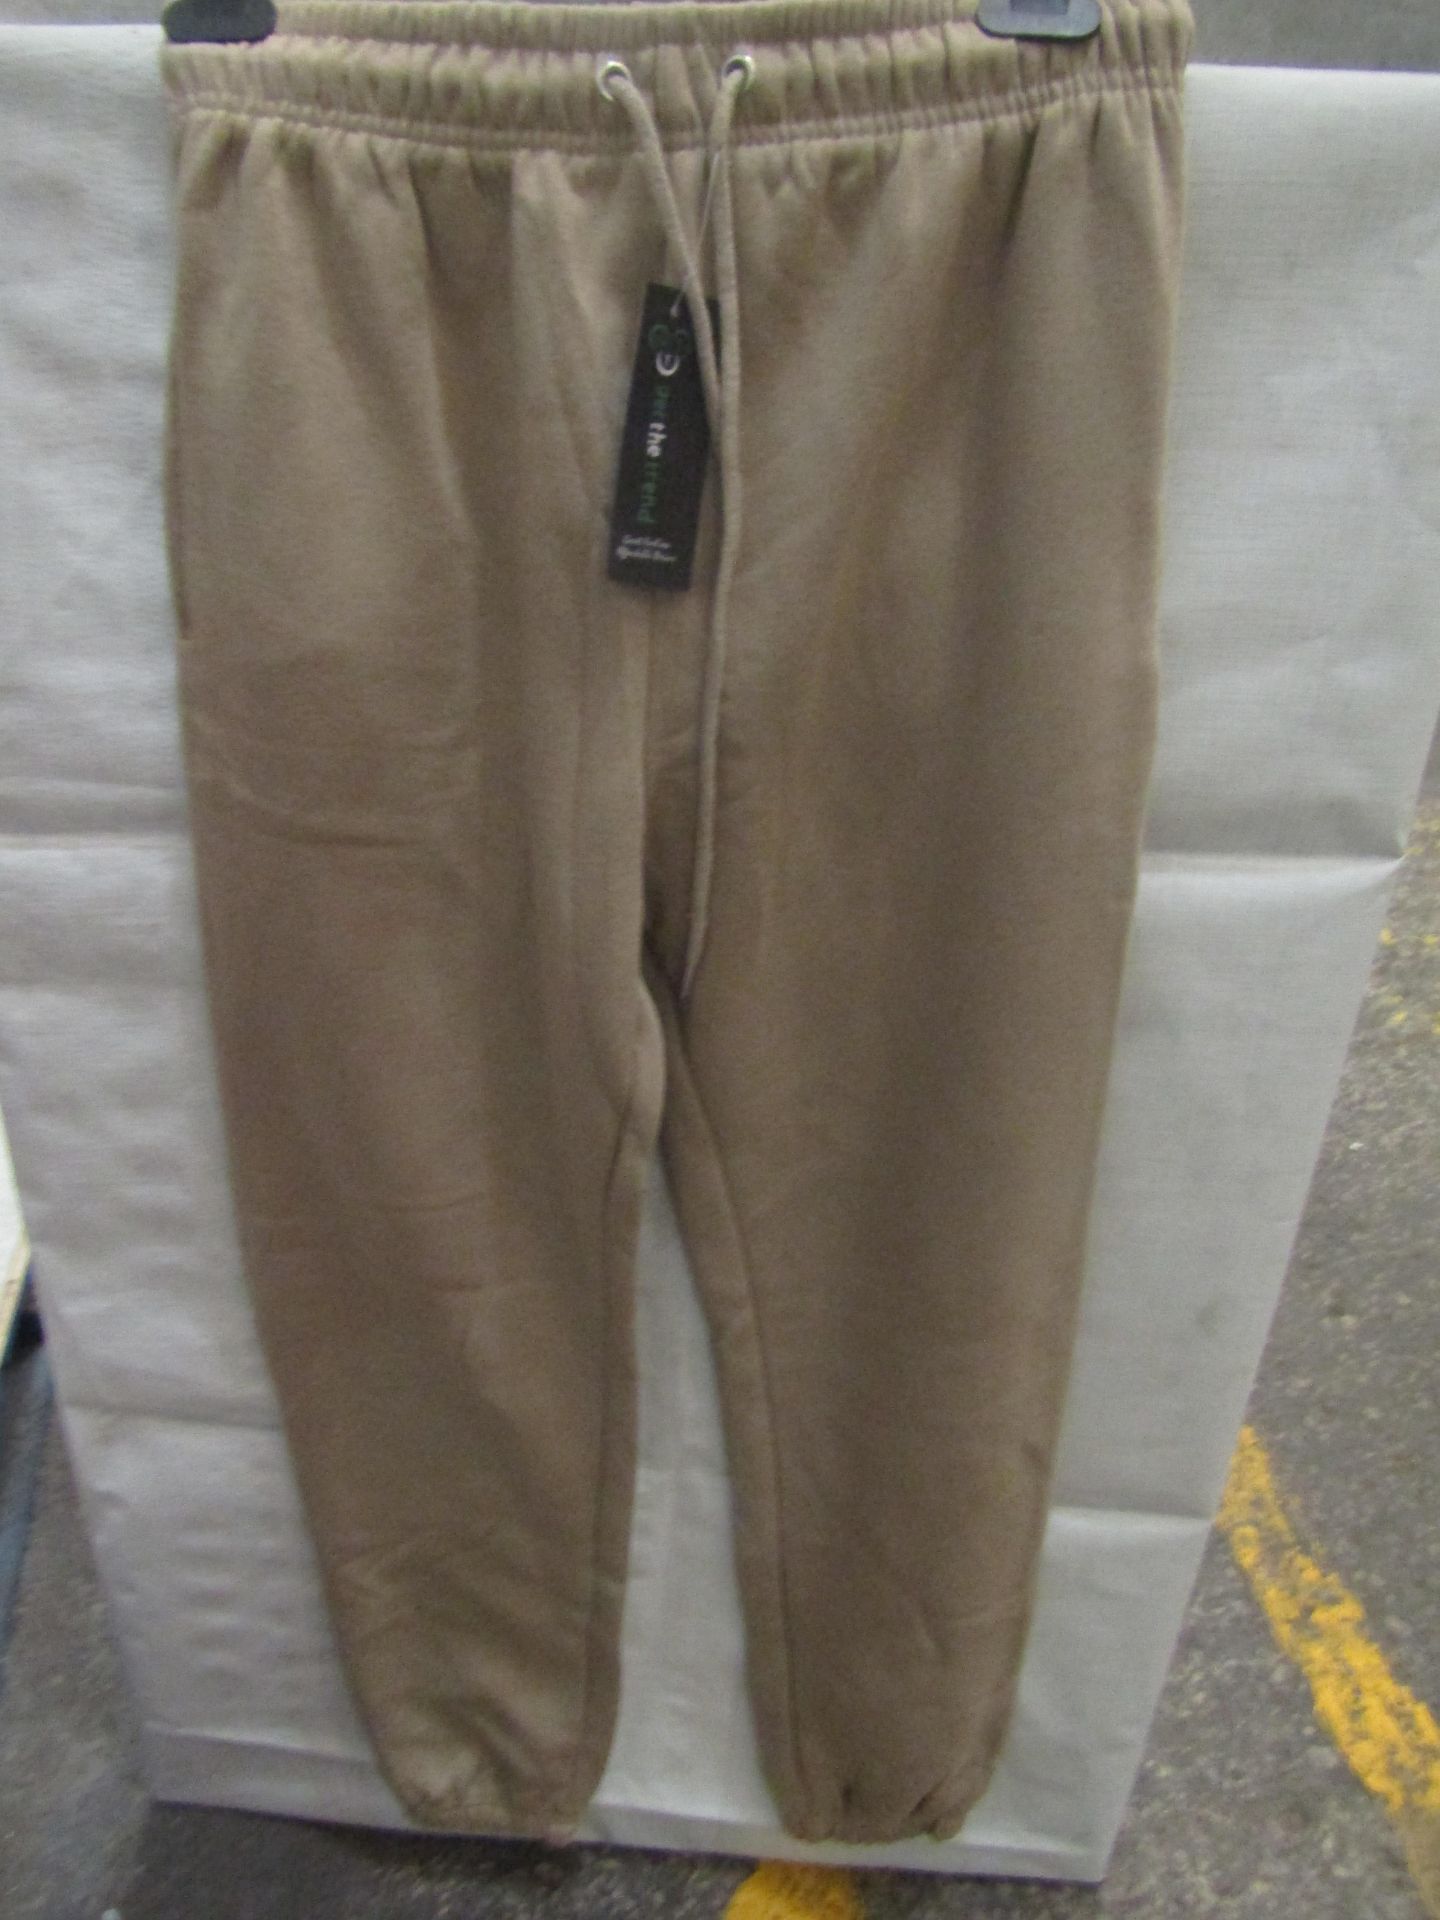 1 X Pair of Get The Trend Joggers Beige Size M New With Tags